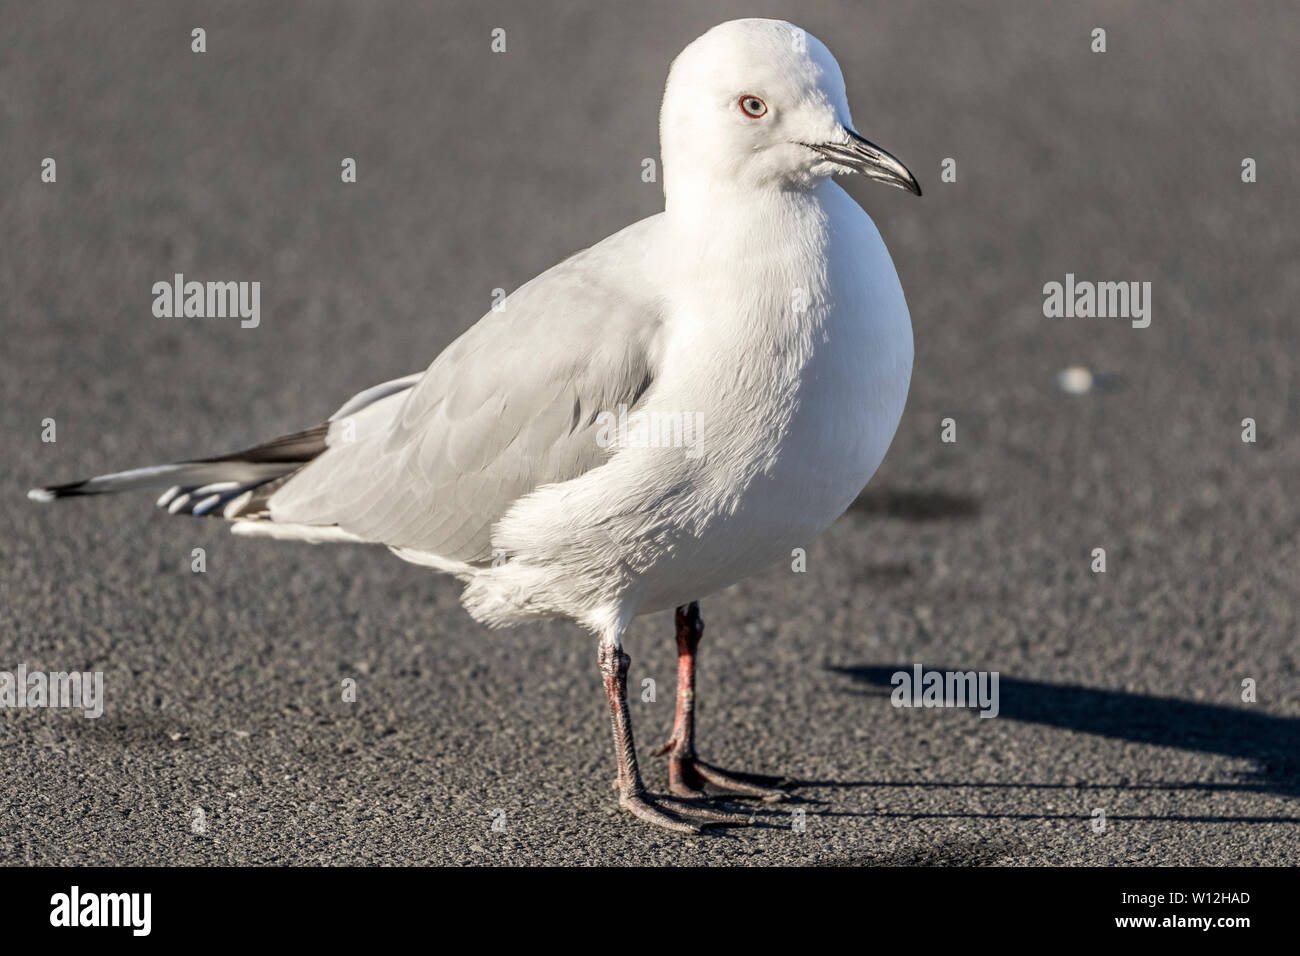 Black-billed gull ( Larus bulleri Hutton ) has the undesirable status of being the most threatened gull species in the world. Stock Photo